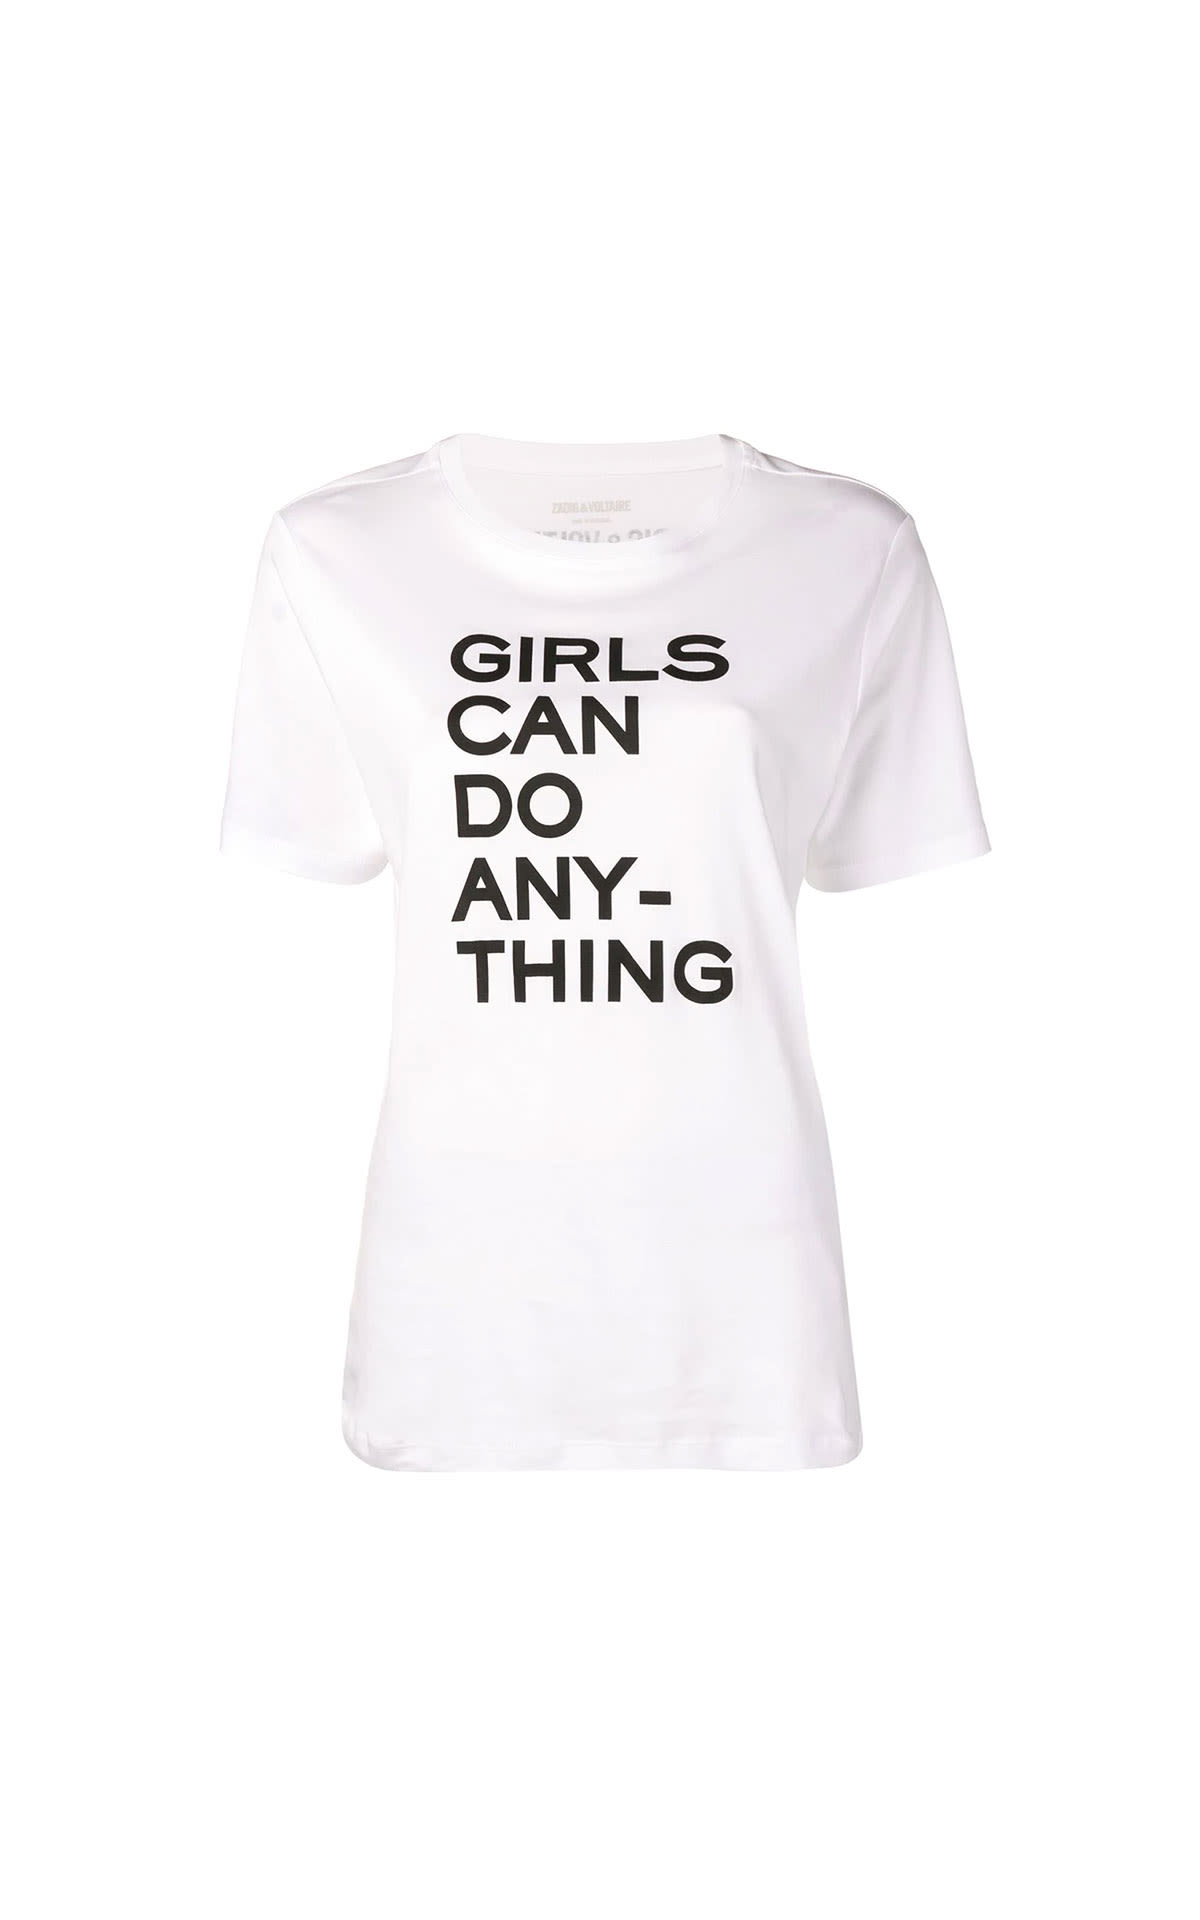 Zadig & Voltaire Girl can do anything t-shirt from Bicester Village